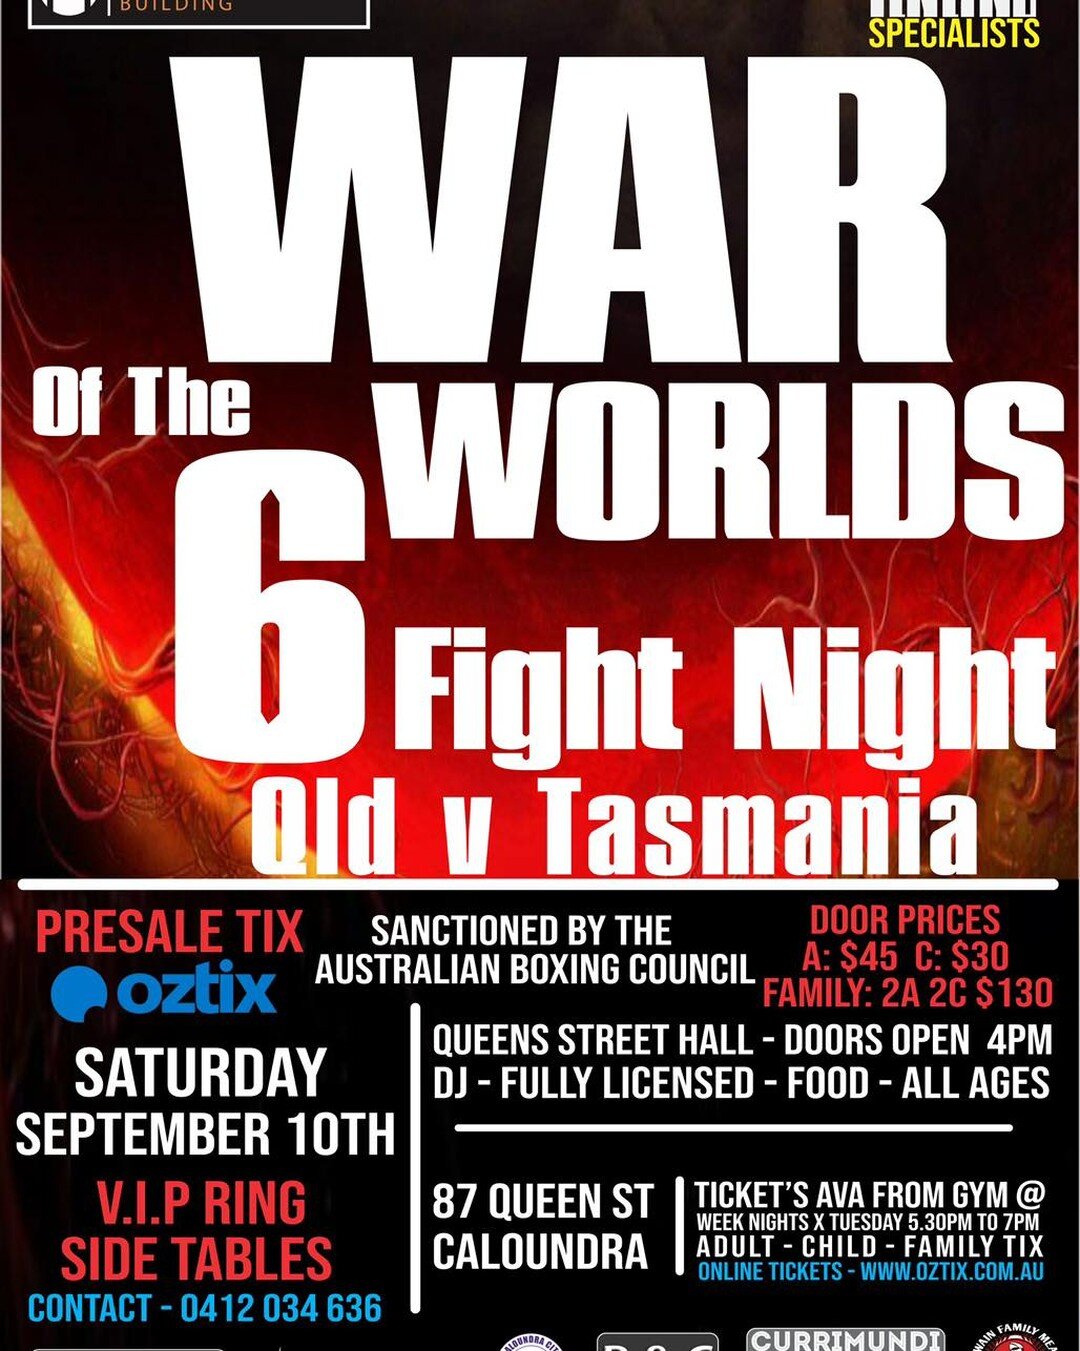 Upcoming Event Saturday September 10 doors open 5 pm interstate bouts Qld v Tasmania Qld v NSW 23 bouts VIP Tables full Bar and Food All Enquiries 0412034636 #liveboxingmatch#boxing#live #event #sunshinecoast #caloundra #fights #queensland